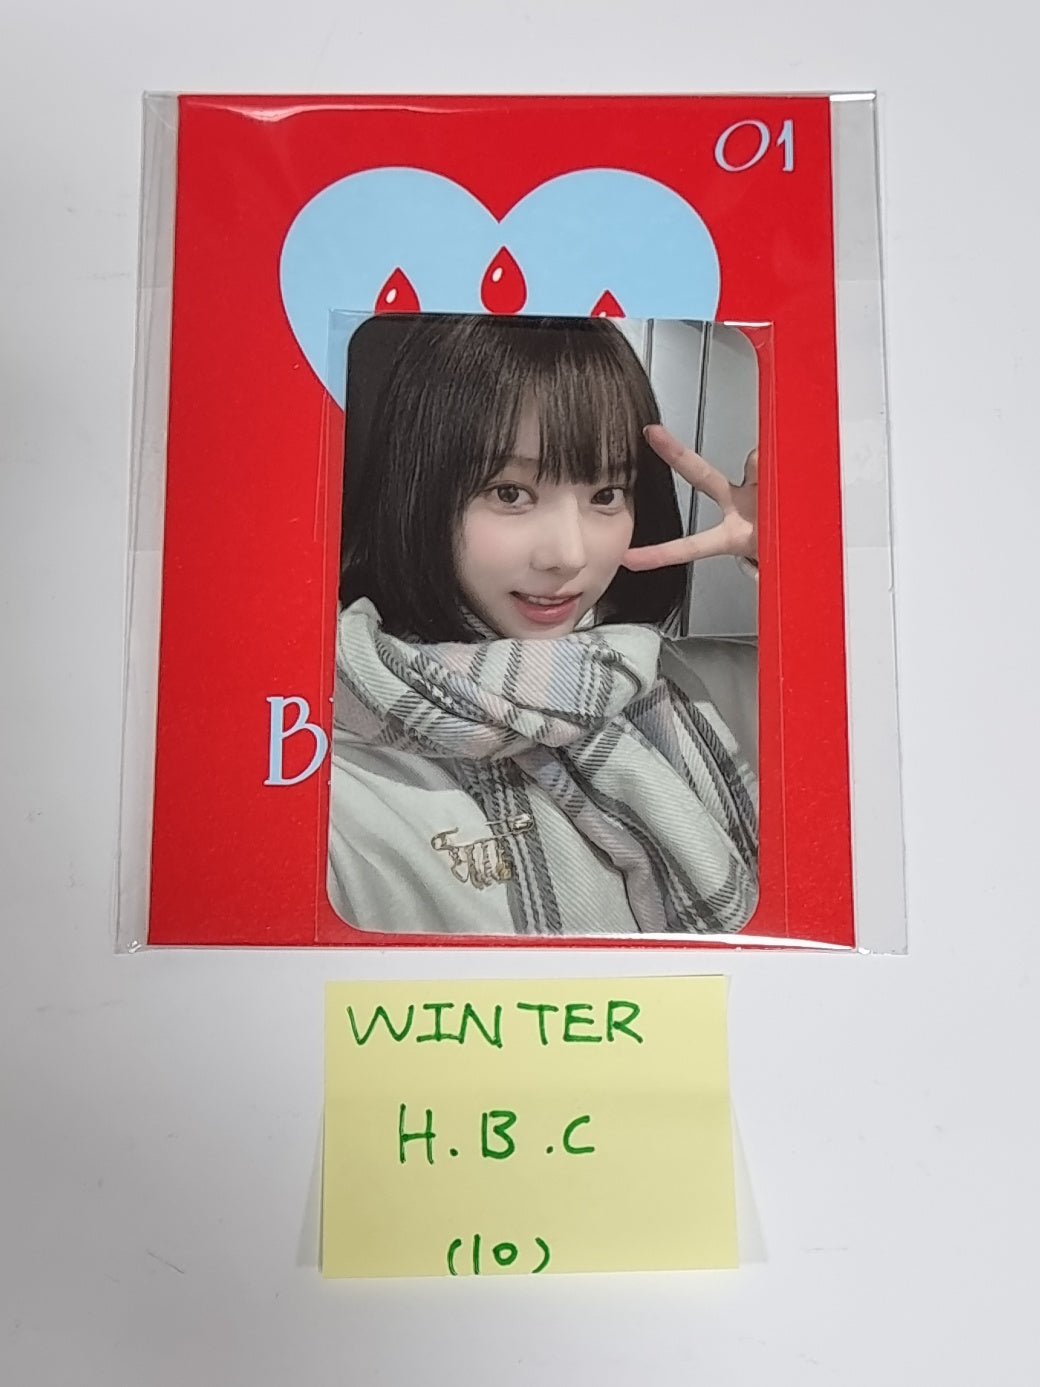 WINTER (of Aespa) "Artist Birthday Card" - Smtown Official Photocard